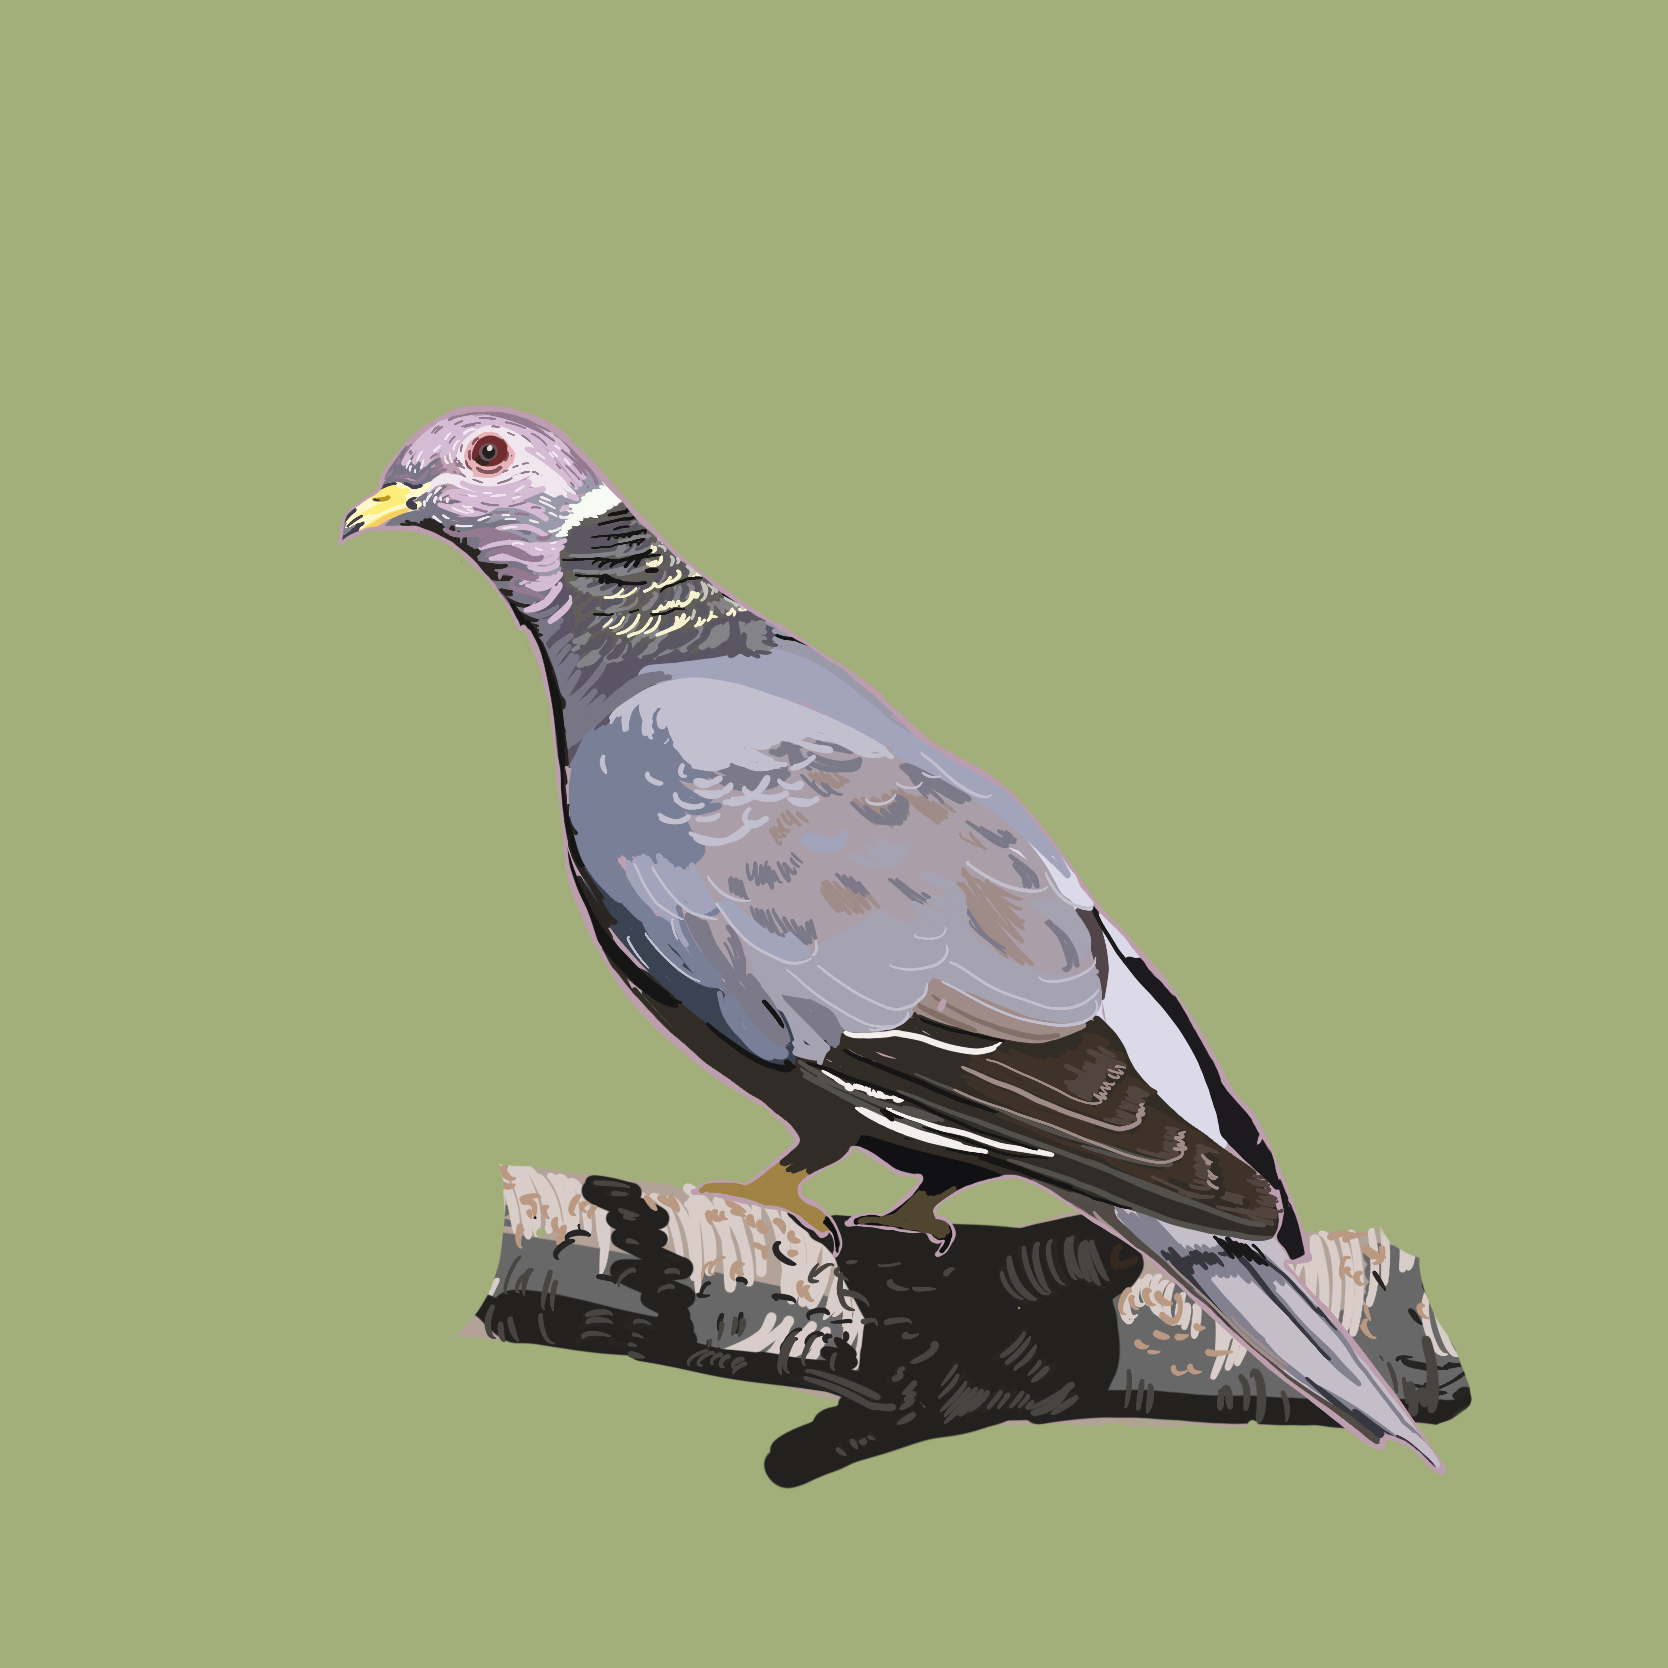 Band-Tailed Pigeon by Nicolette Hodgson